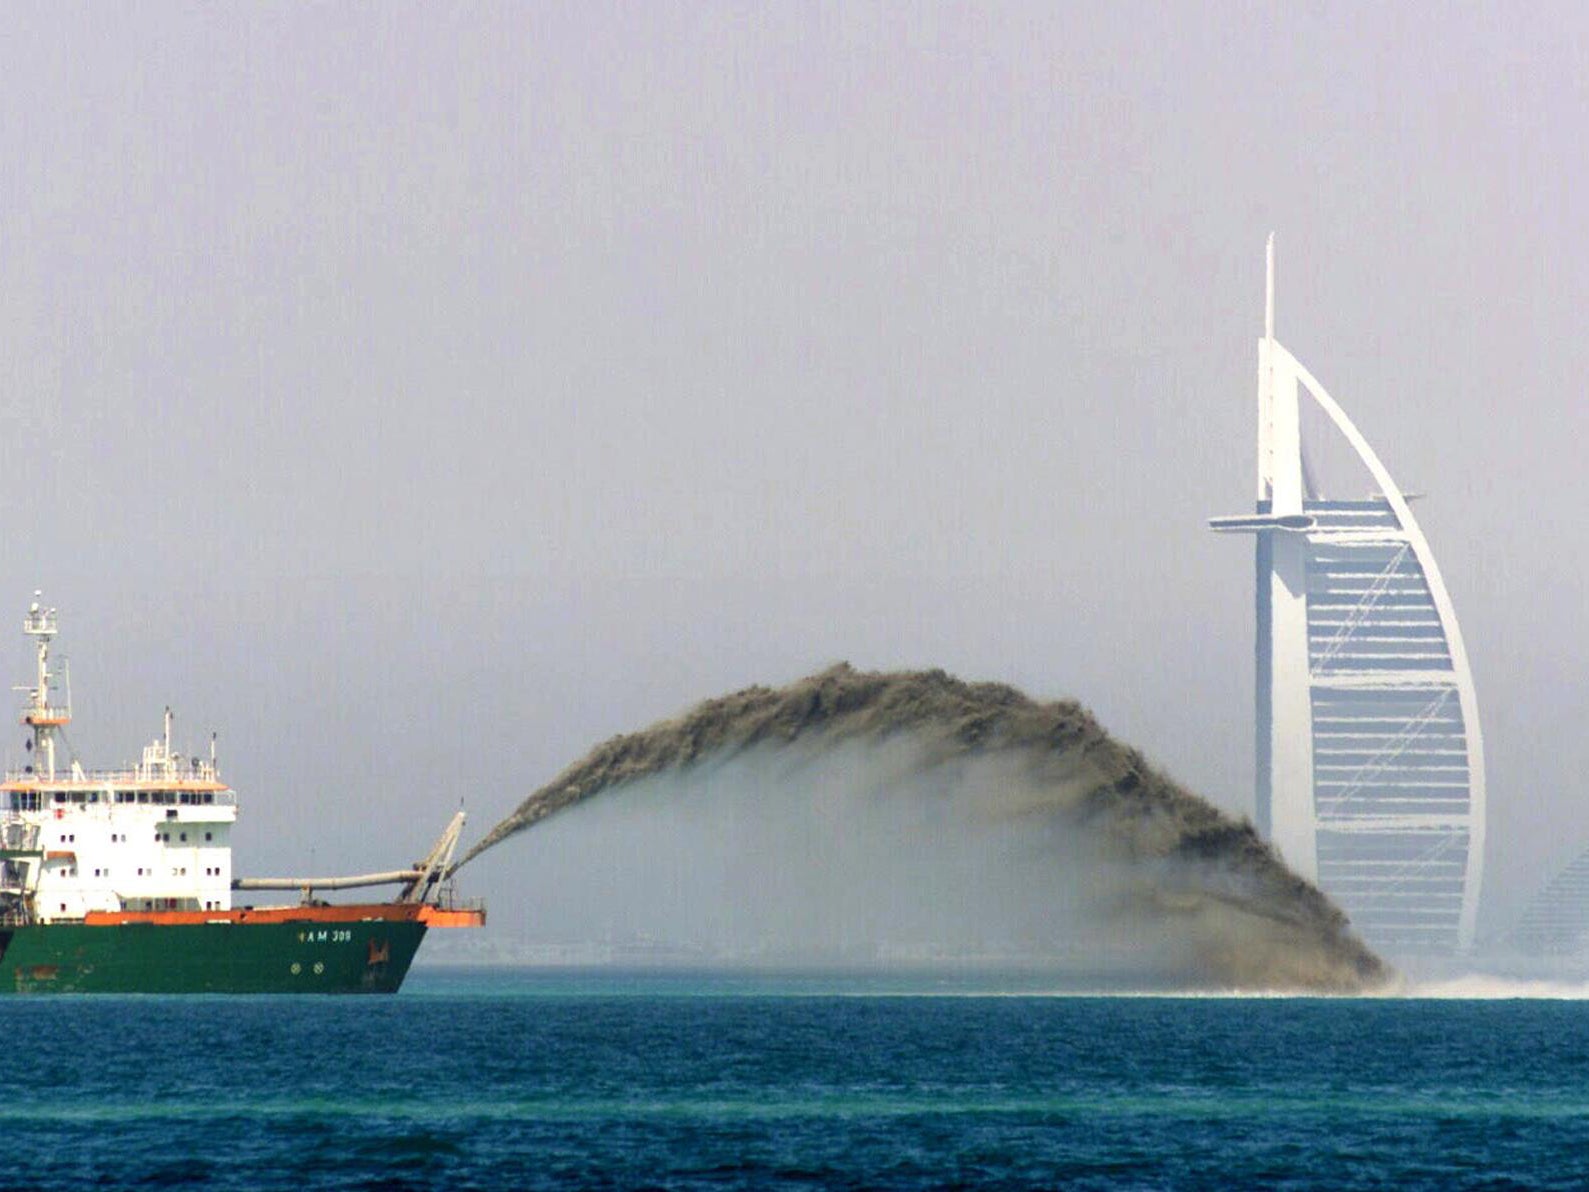 A dredger boat dumps huge amounts of sand into the sea to create new land for building development (AFP/Getty)